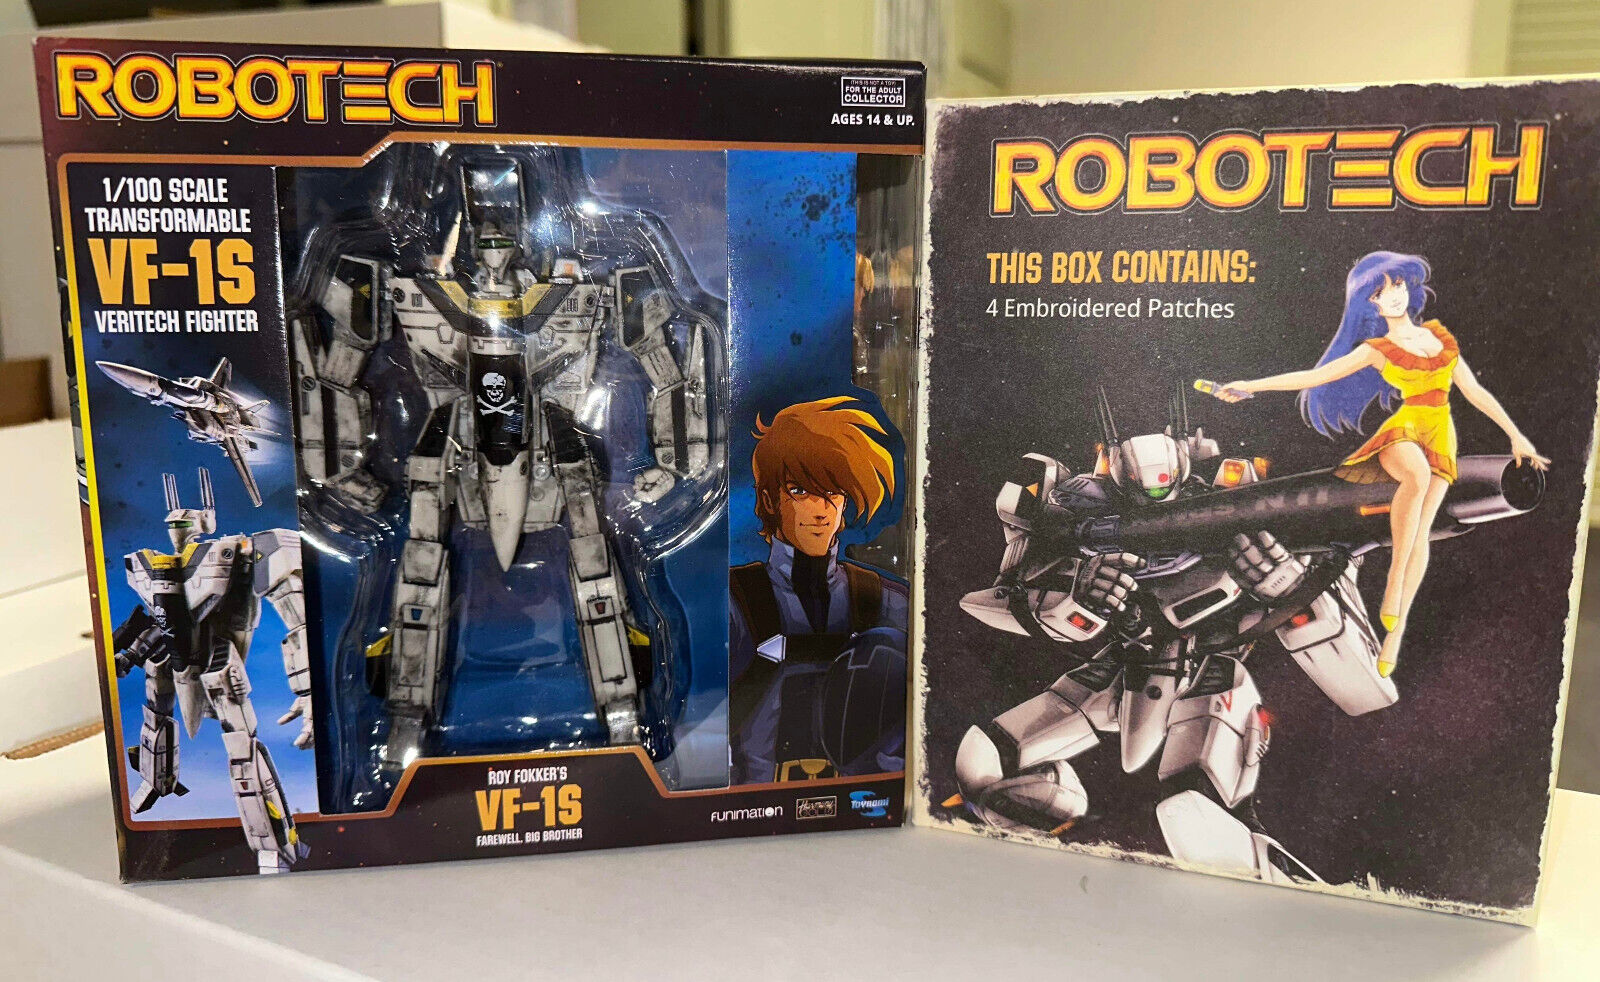 🔥 ROBOTECH 1/100 Scale VF-1S Veritech Fighter Roy Fokker Figure + Patches